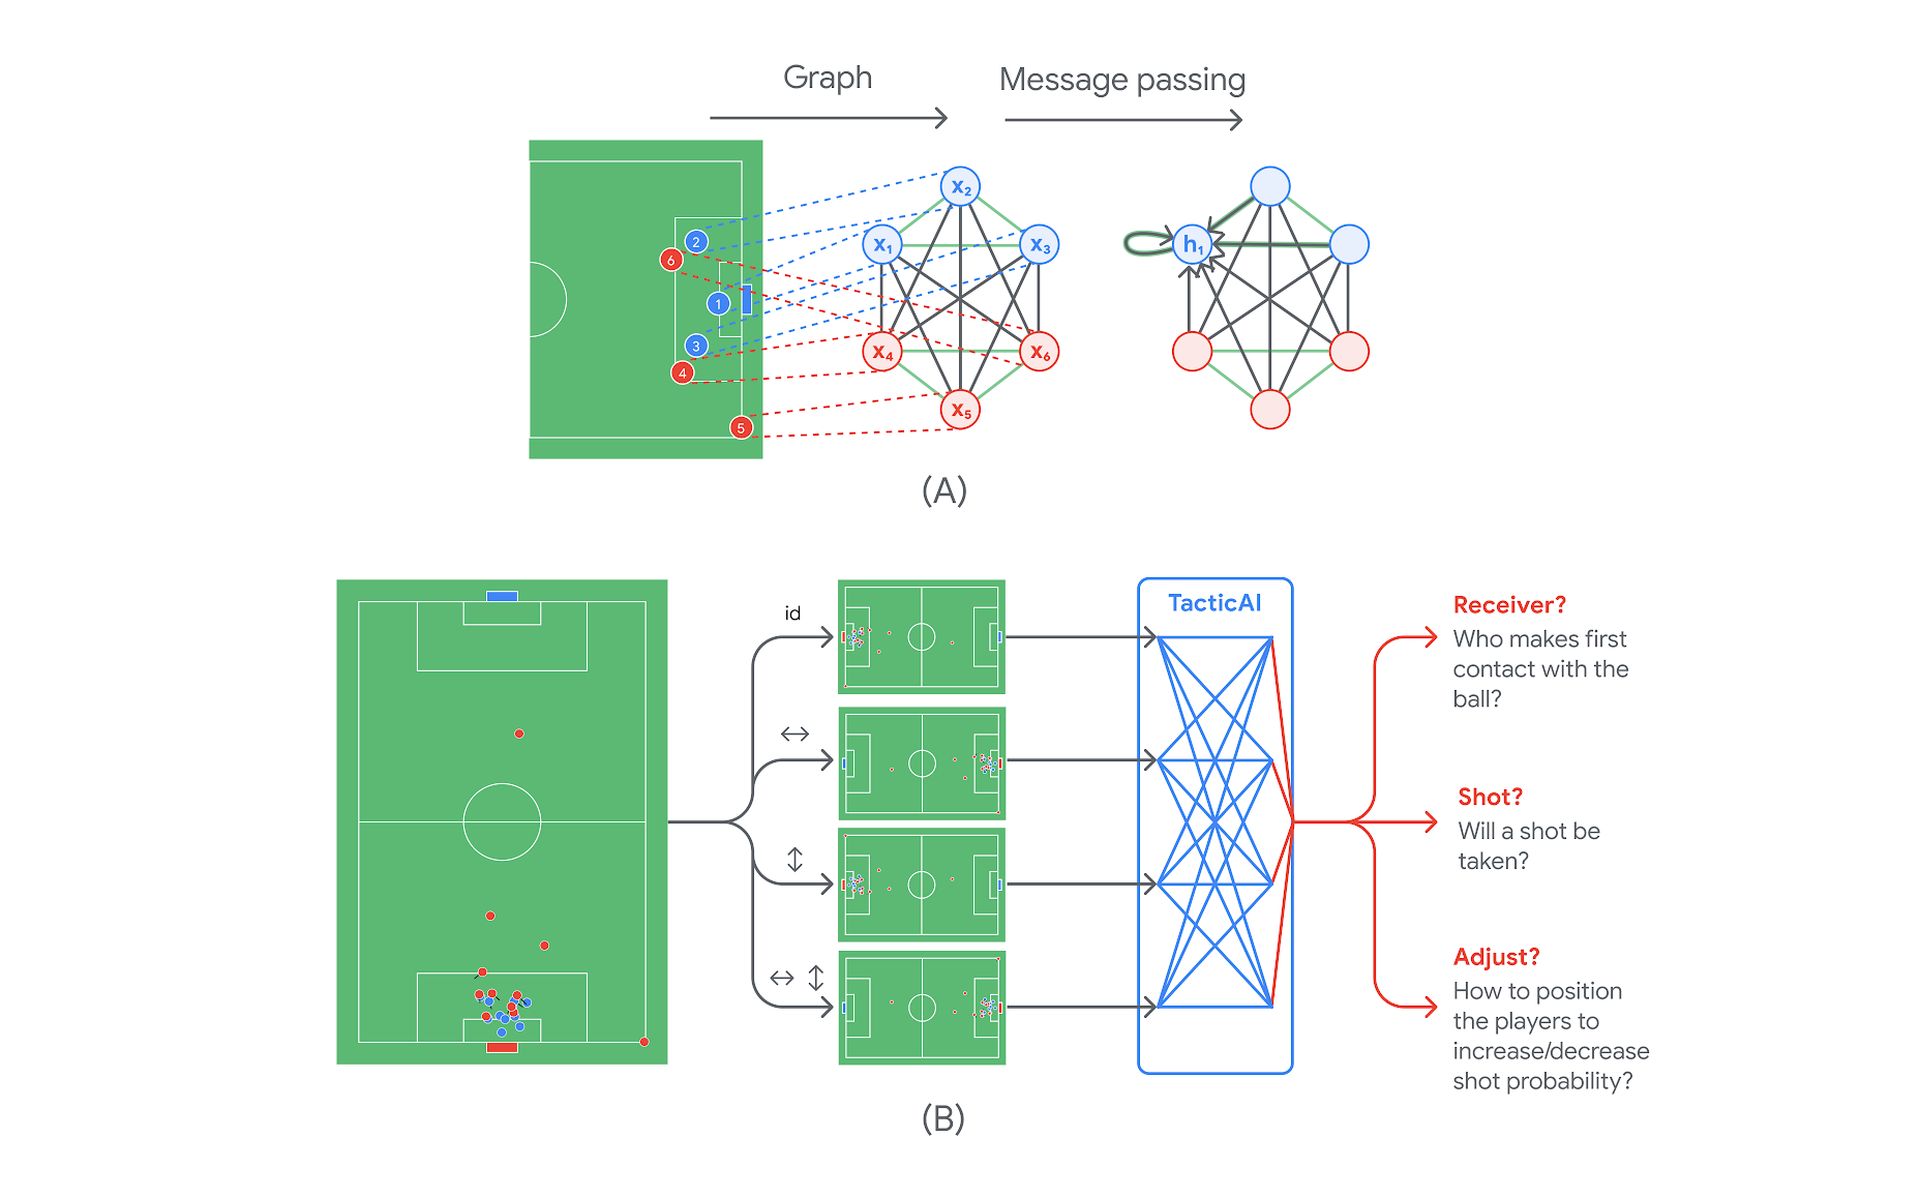 Liverpool team up with Deepmind to always "take corners quickly"